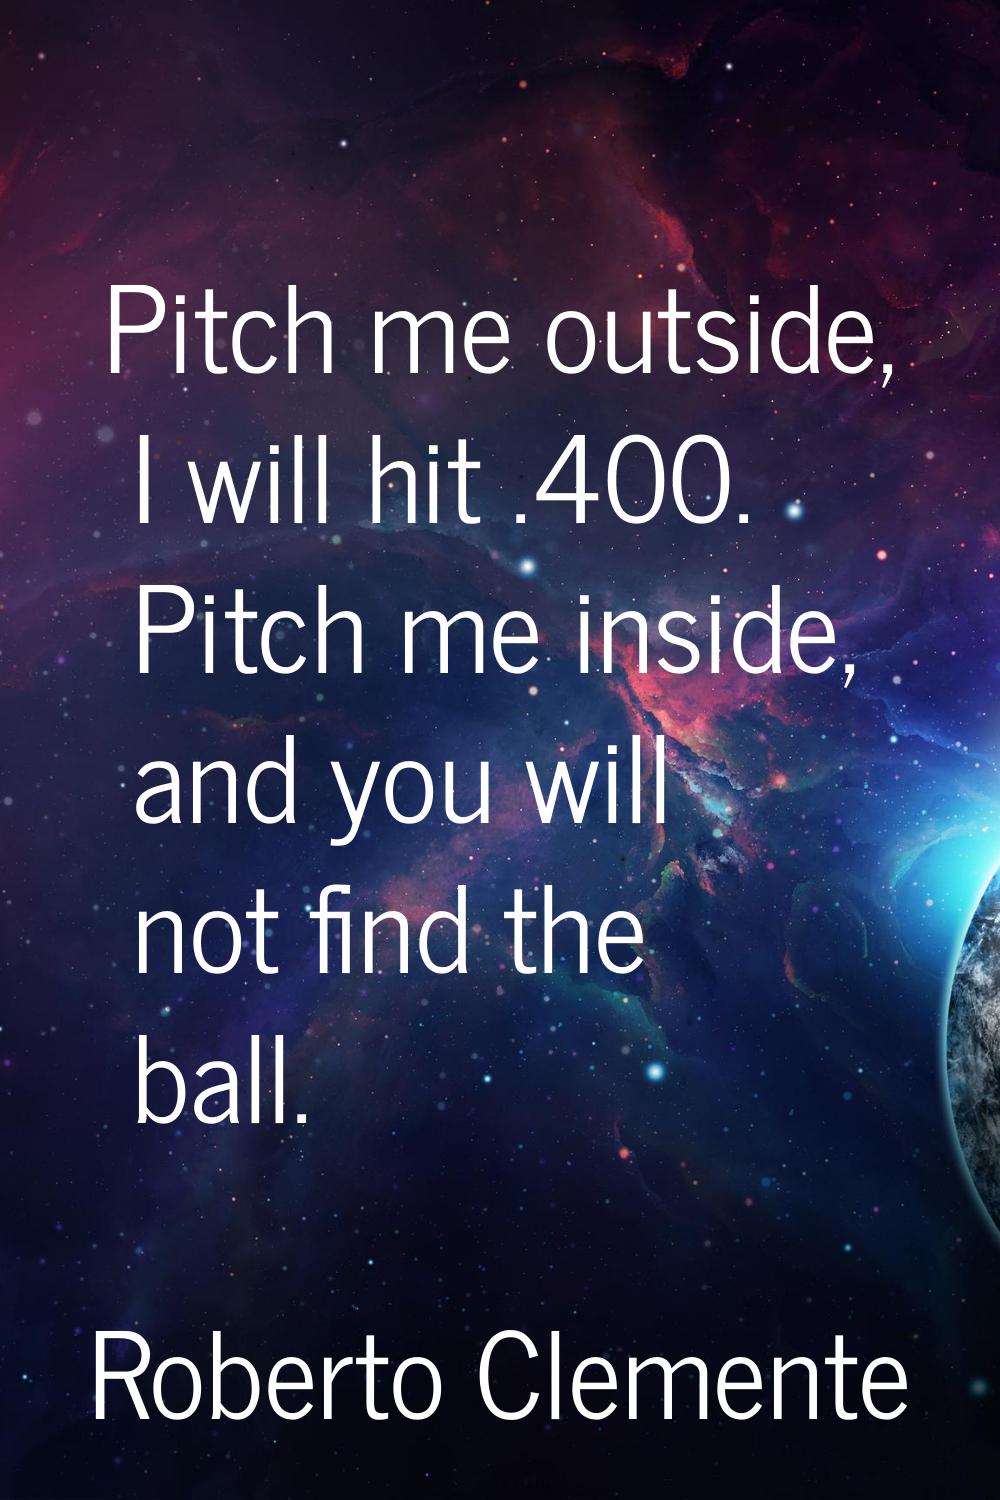 Pitch me outside, I will hit .400. Pitch me inside, and you will not find the ball.